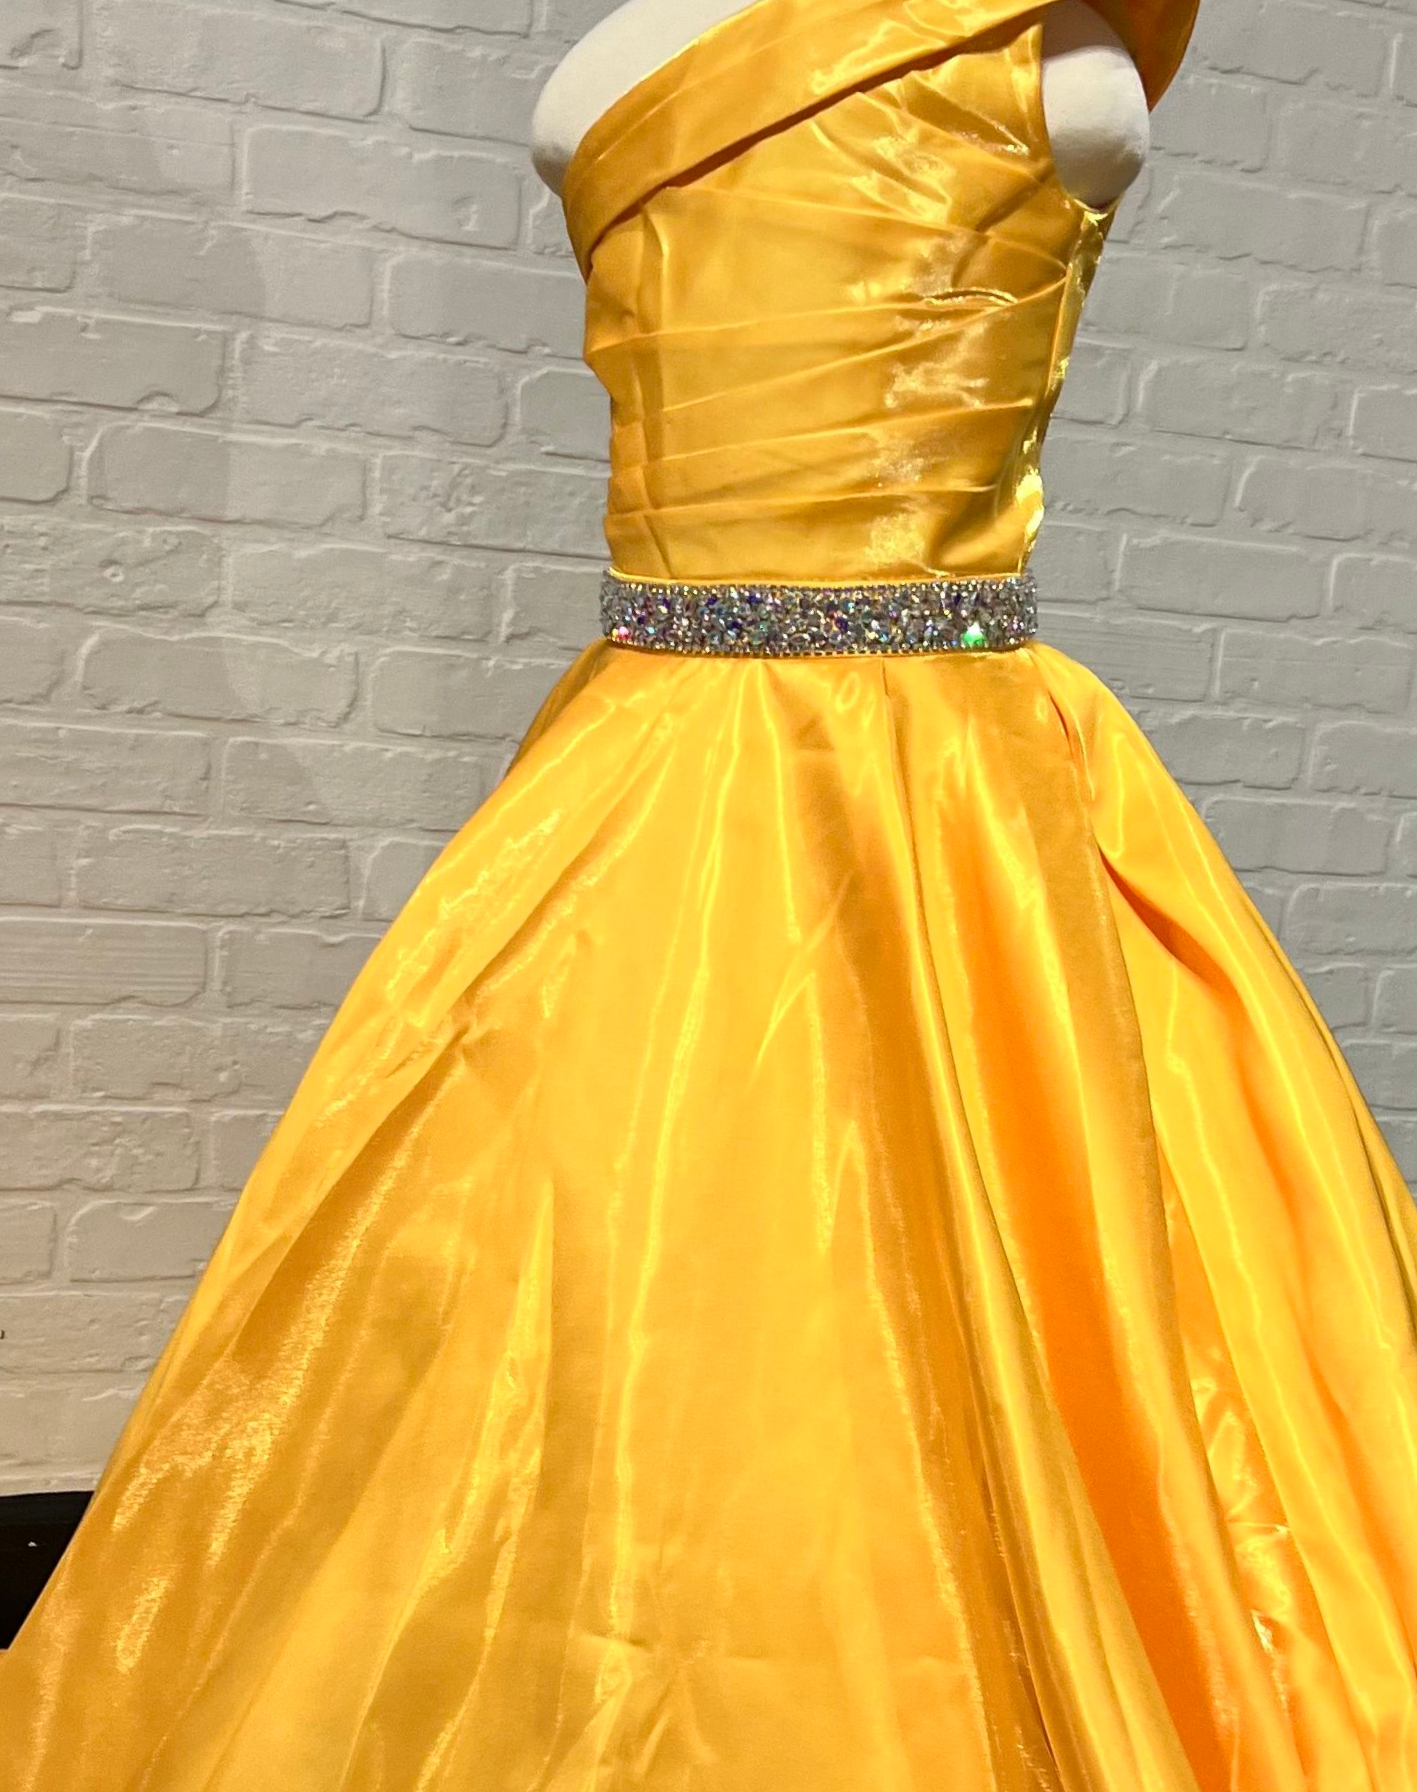 Sugar Kayne C312 Girls and Preteens Long A Line One Shoulder Formal Pageant Dress Gathered Bodice Make a bold impression at your next pageant. This one-shoulder shimmer satin ball gown has a hand-beaded waistband to highlight the waist.  Colors: Cherry, White, Marigold